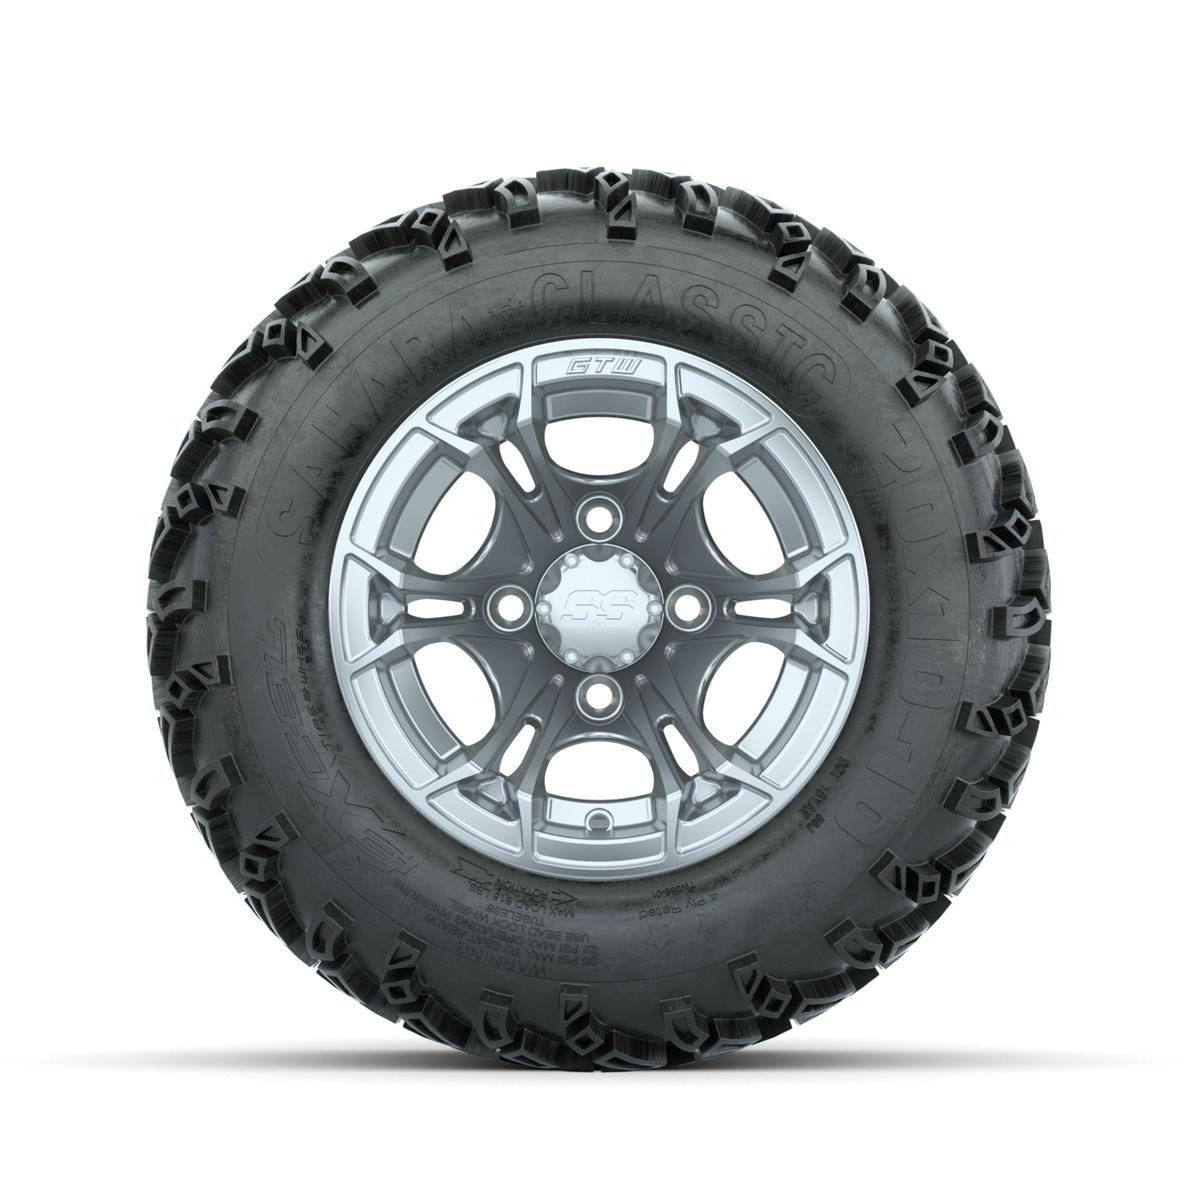 GTW Spyder Silver Brush 10 in Wheels with 20x10-10 Sahara Classic All Terrain Tires – Full Set